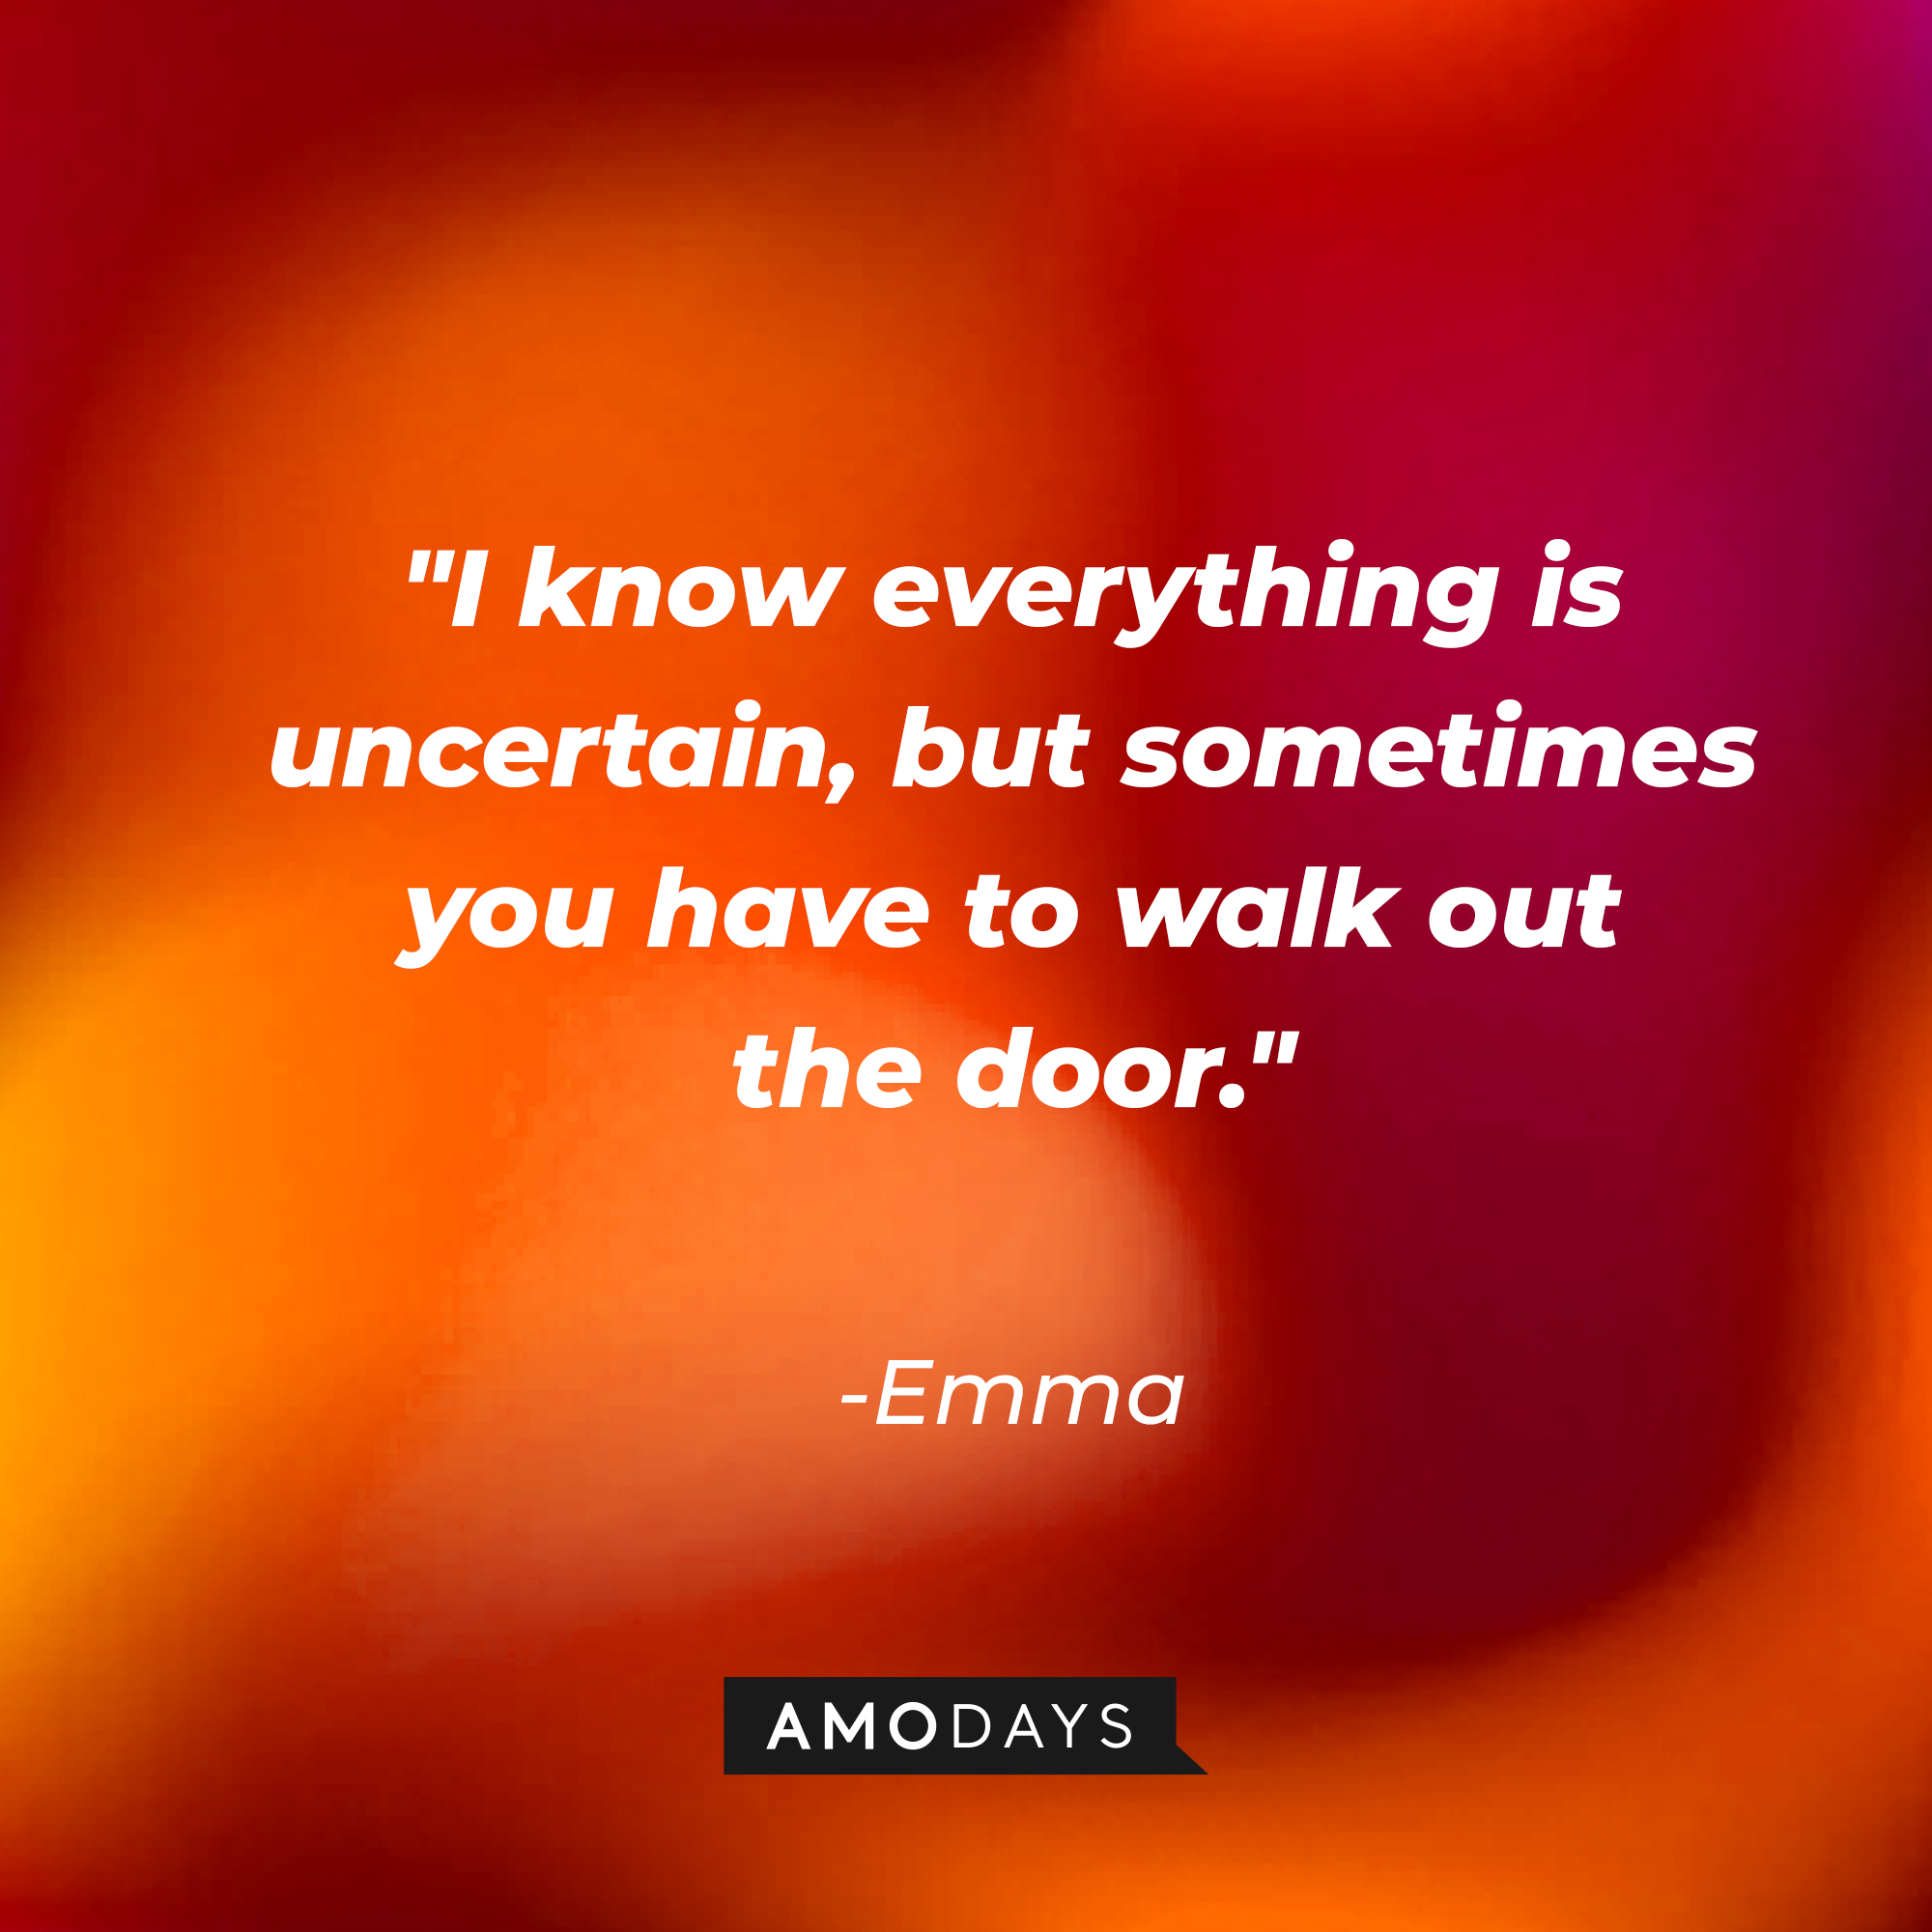 Emma's quote: "I know everything is uncertain, but sometimes you have to walk out the door." | Source: Amodays